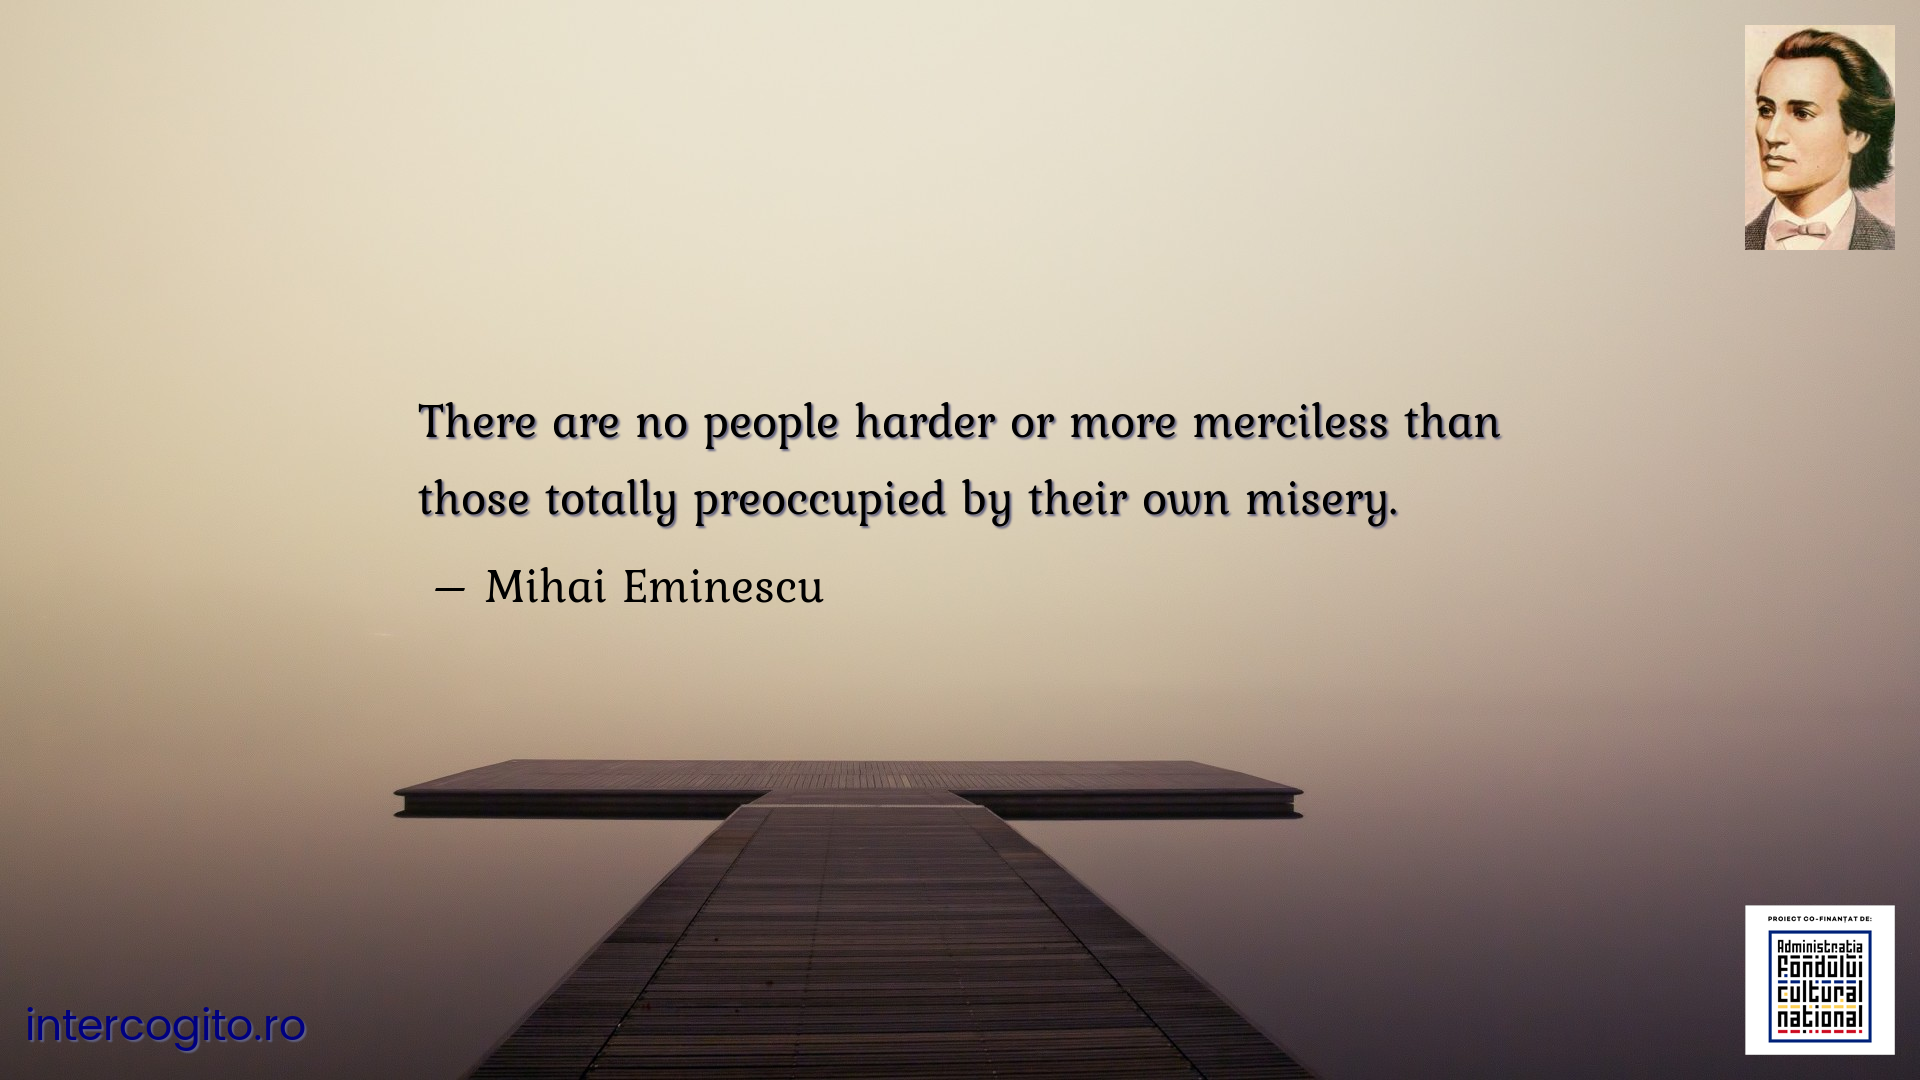 There are no people harder or more merciless than those totally preoccupied by their own misery.